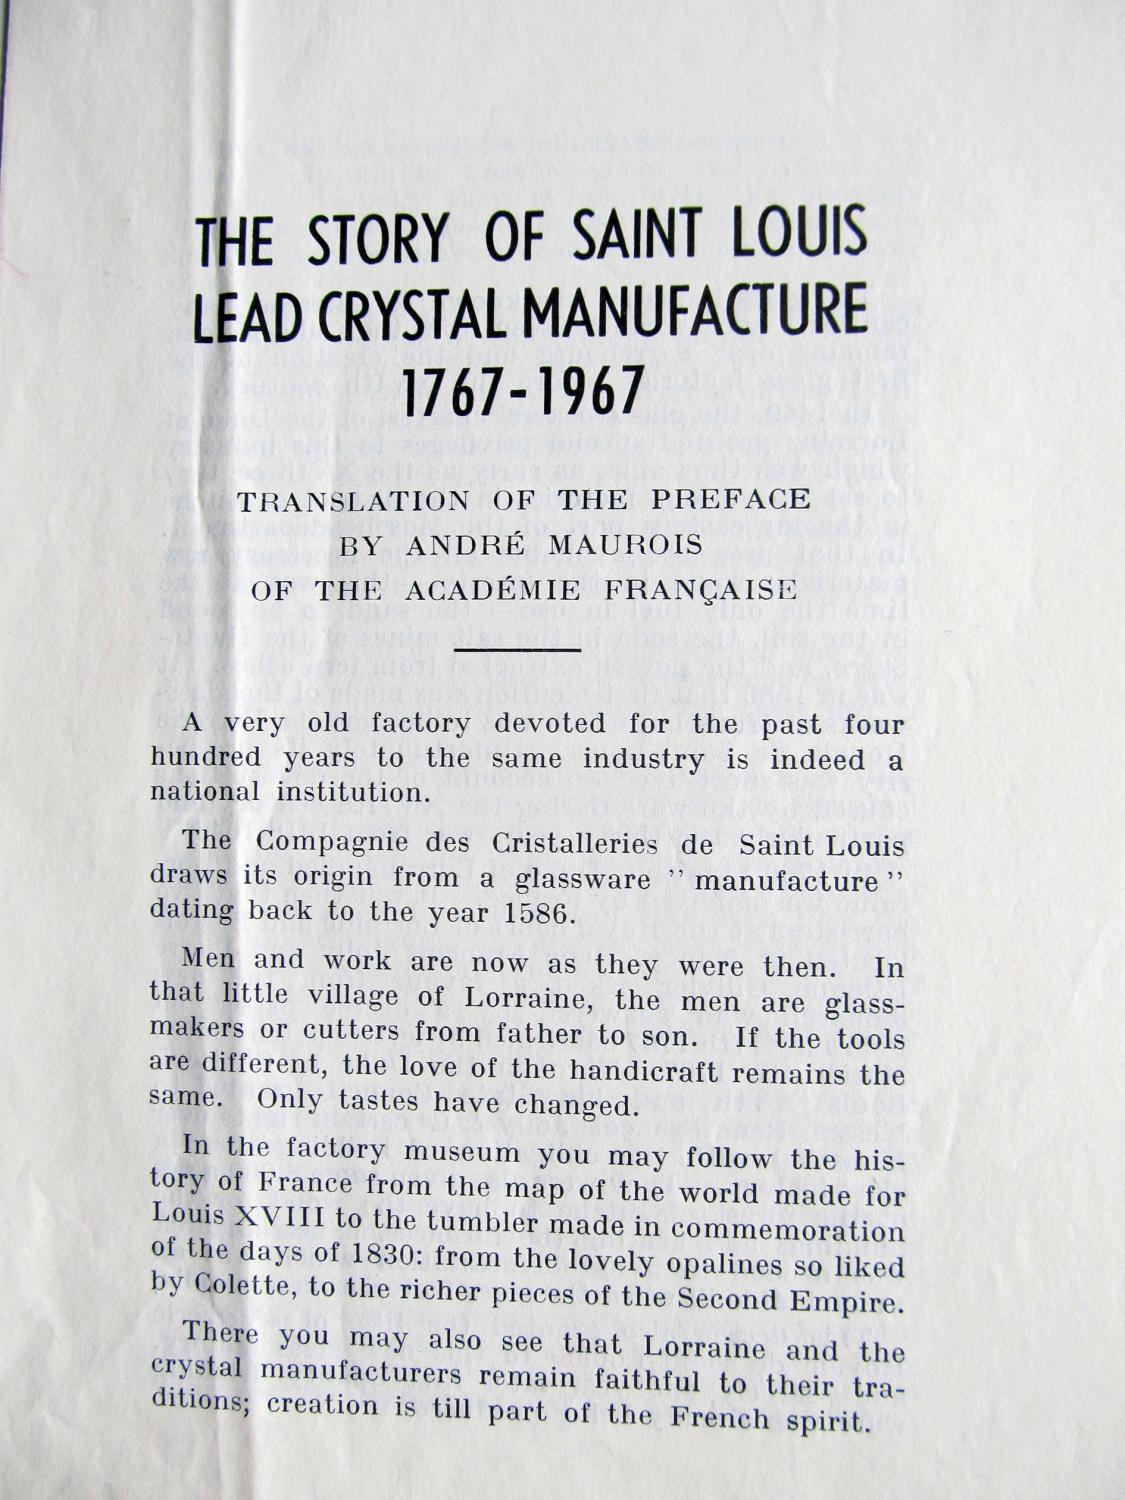 The French Roots of St. Louis